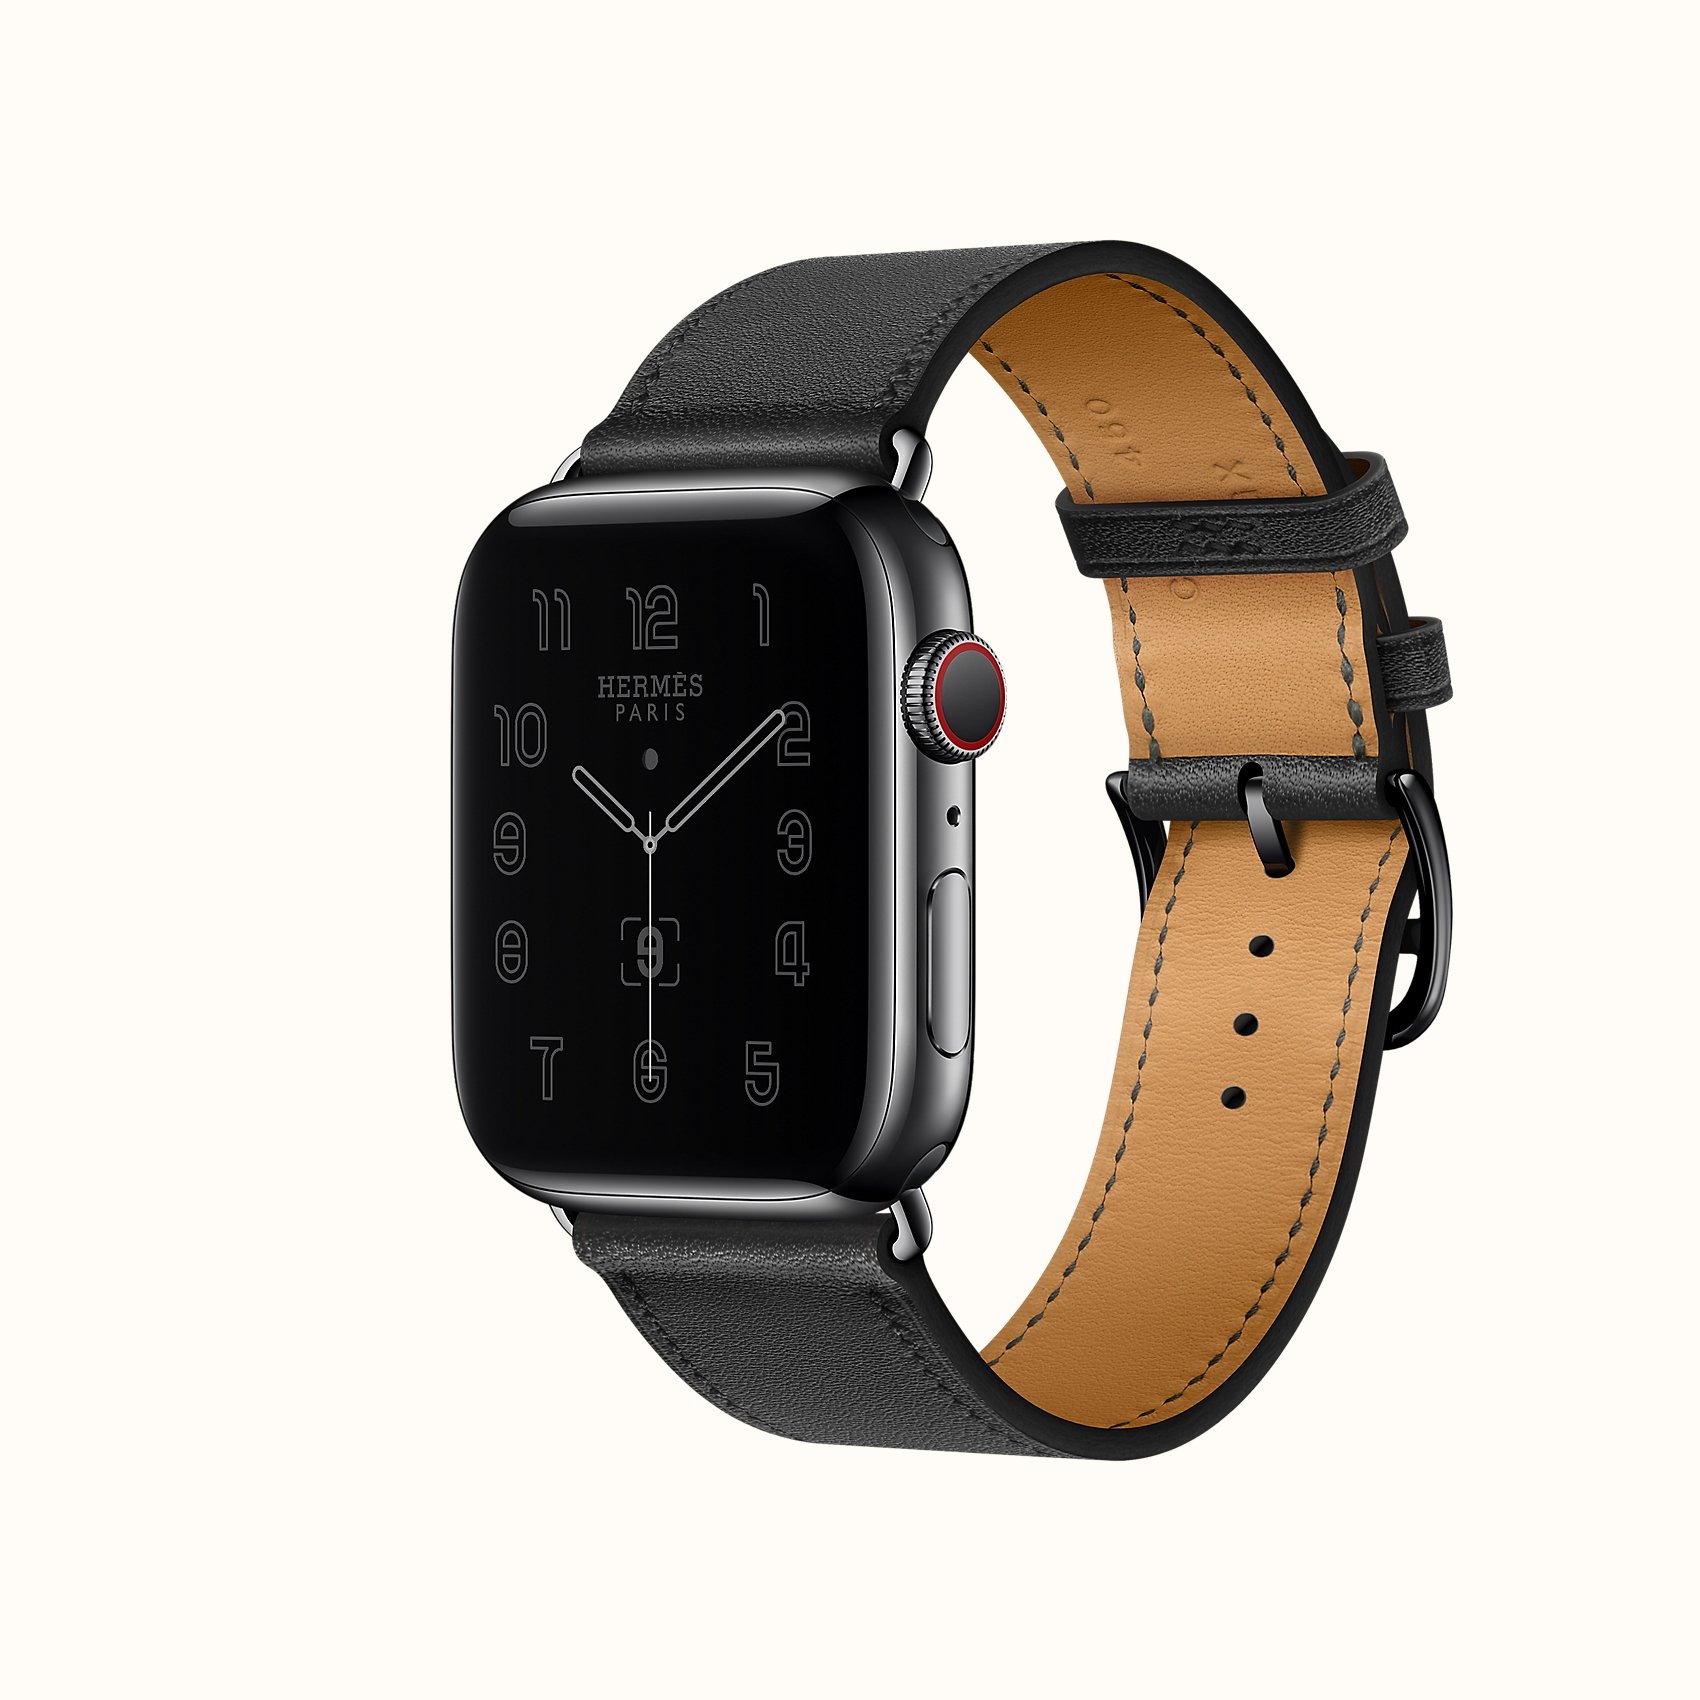 Space Black Series 6 case & Band Apple Watch Hermes Single Tour 44 mm